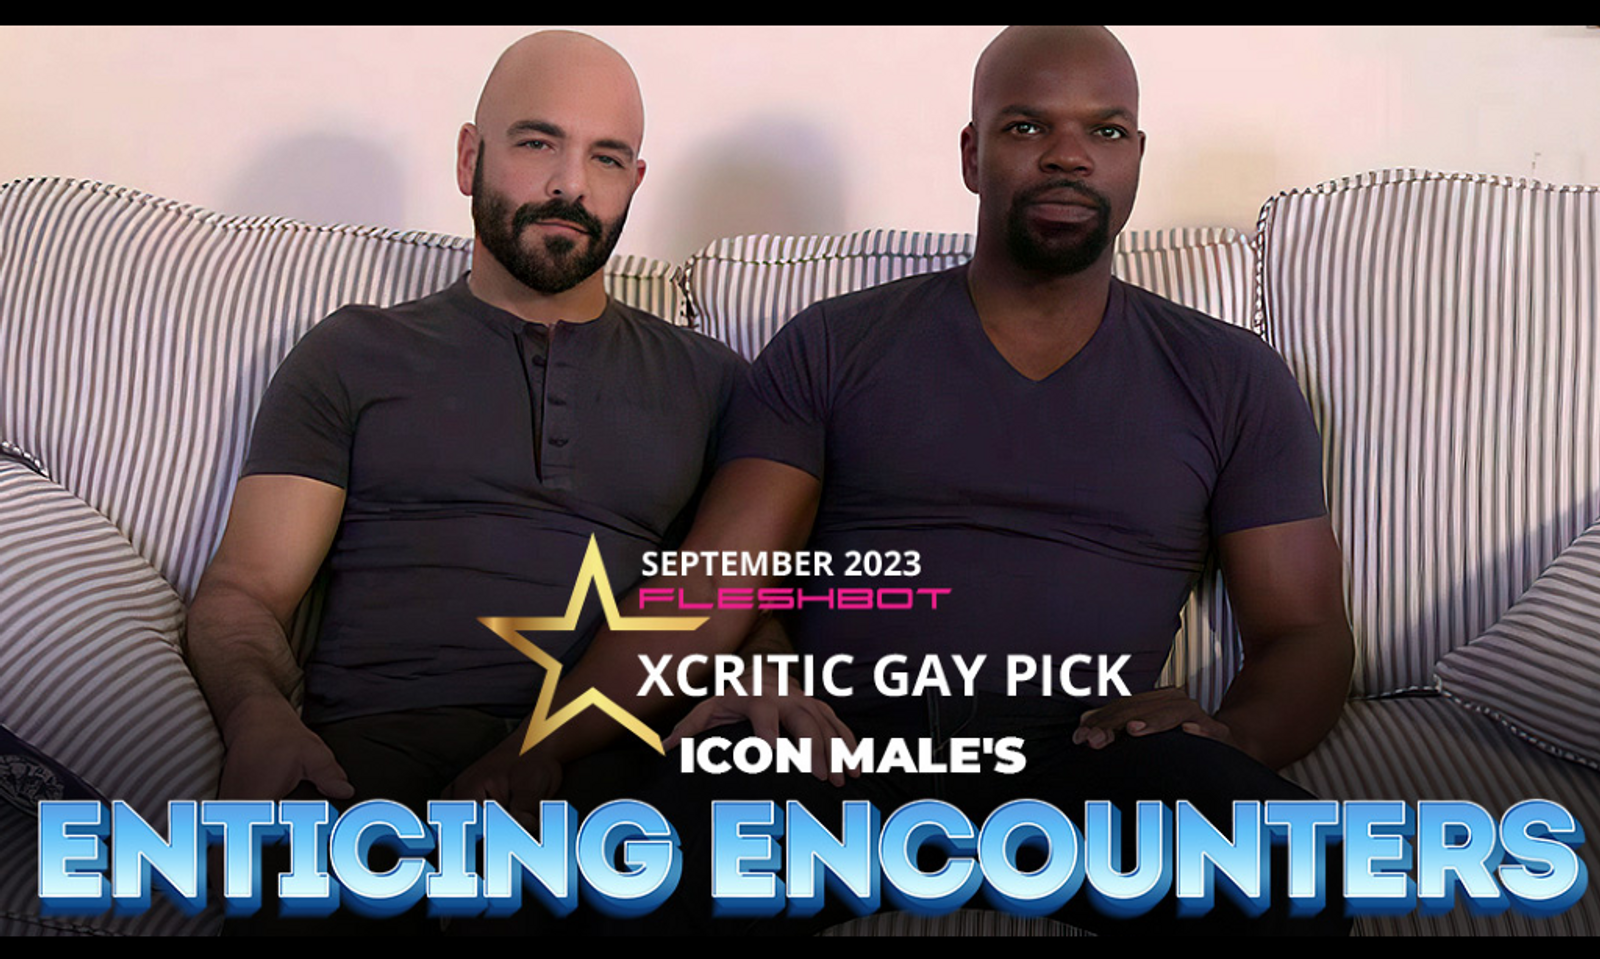 'Enticing Encounters' is September’s XCritic Gay Pick